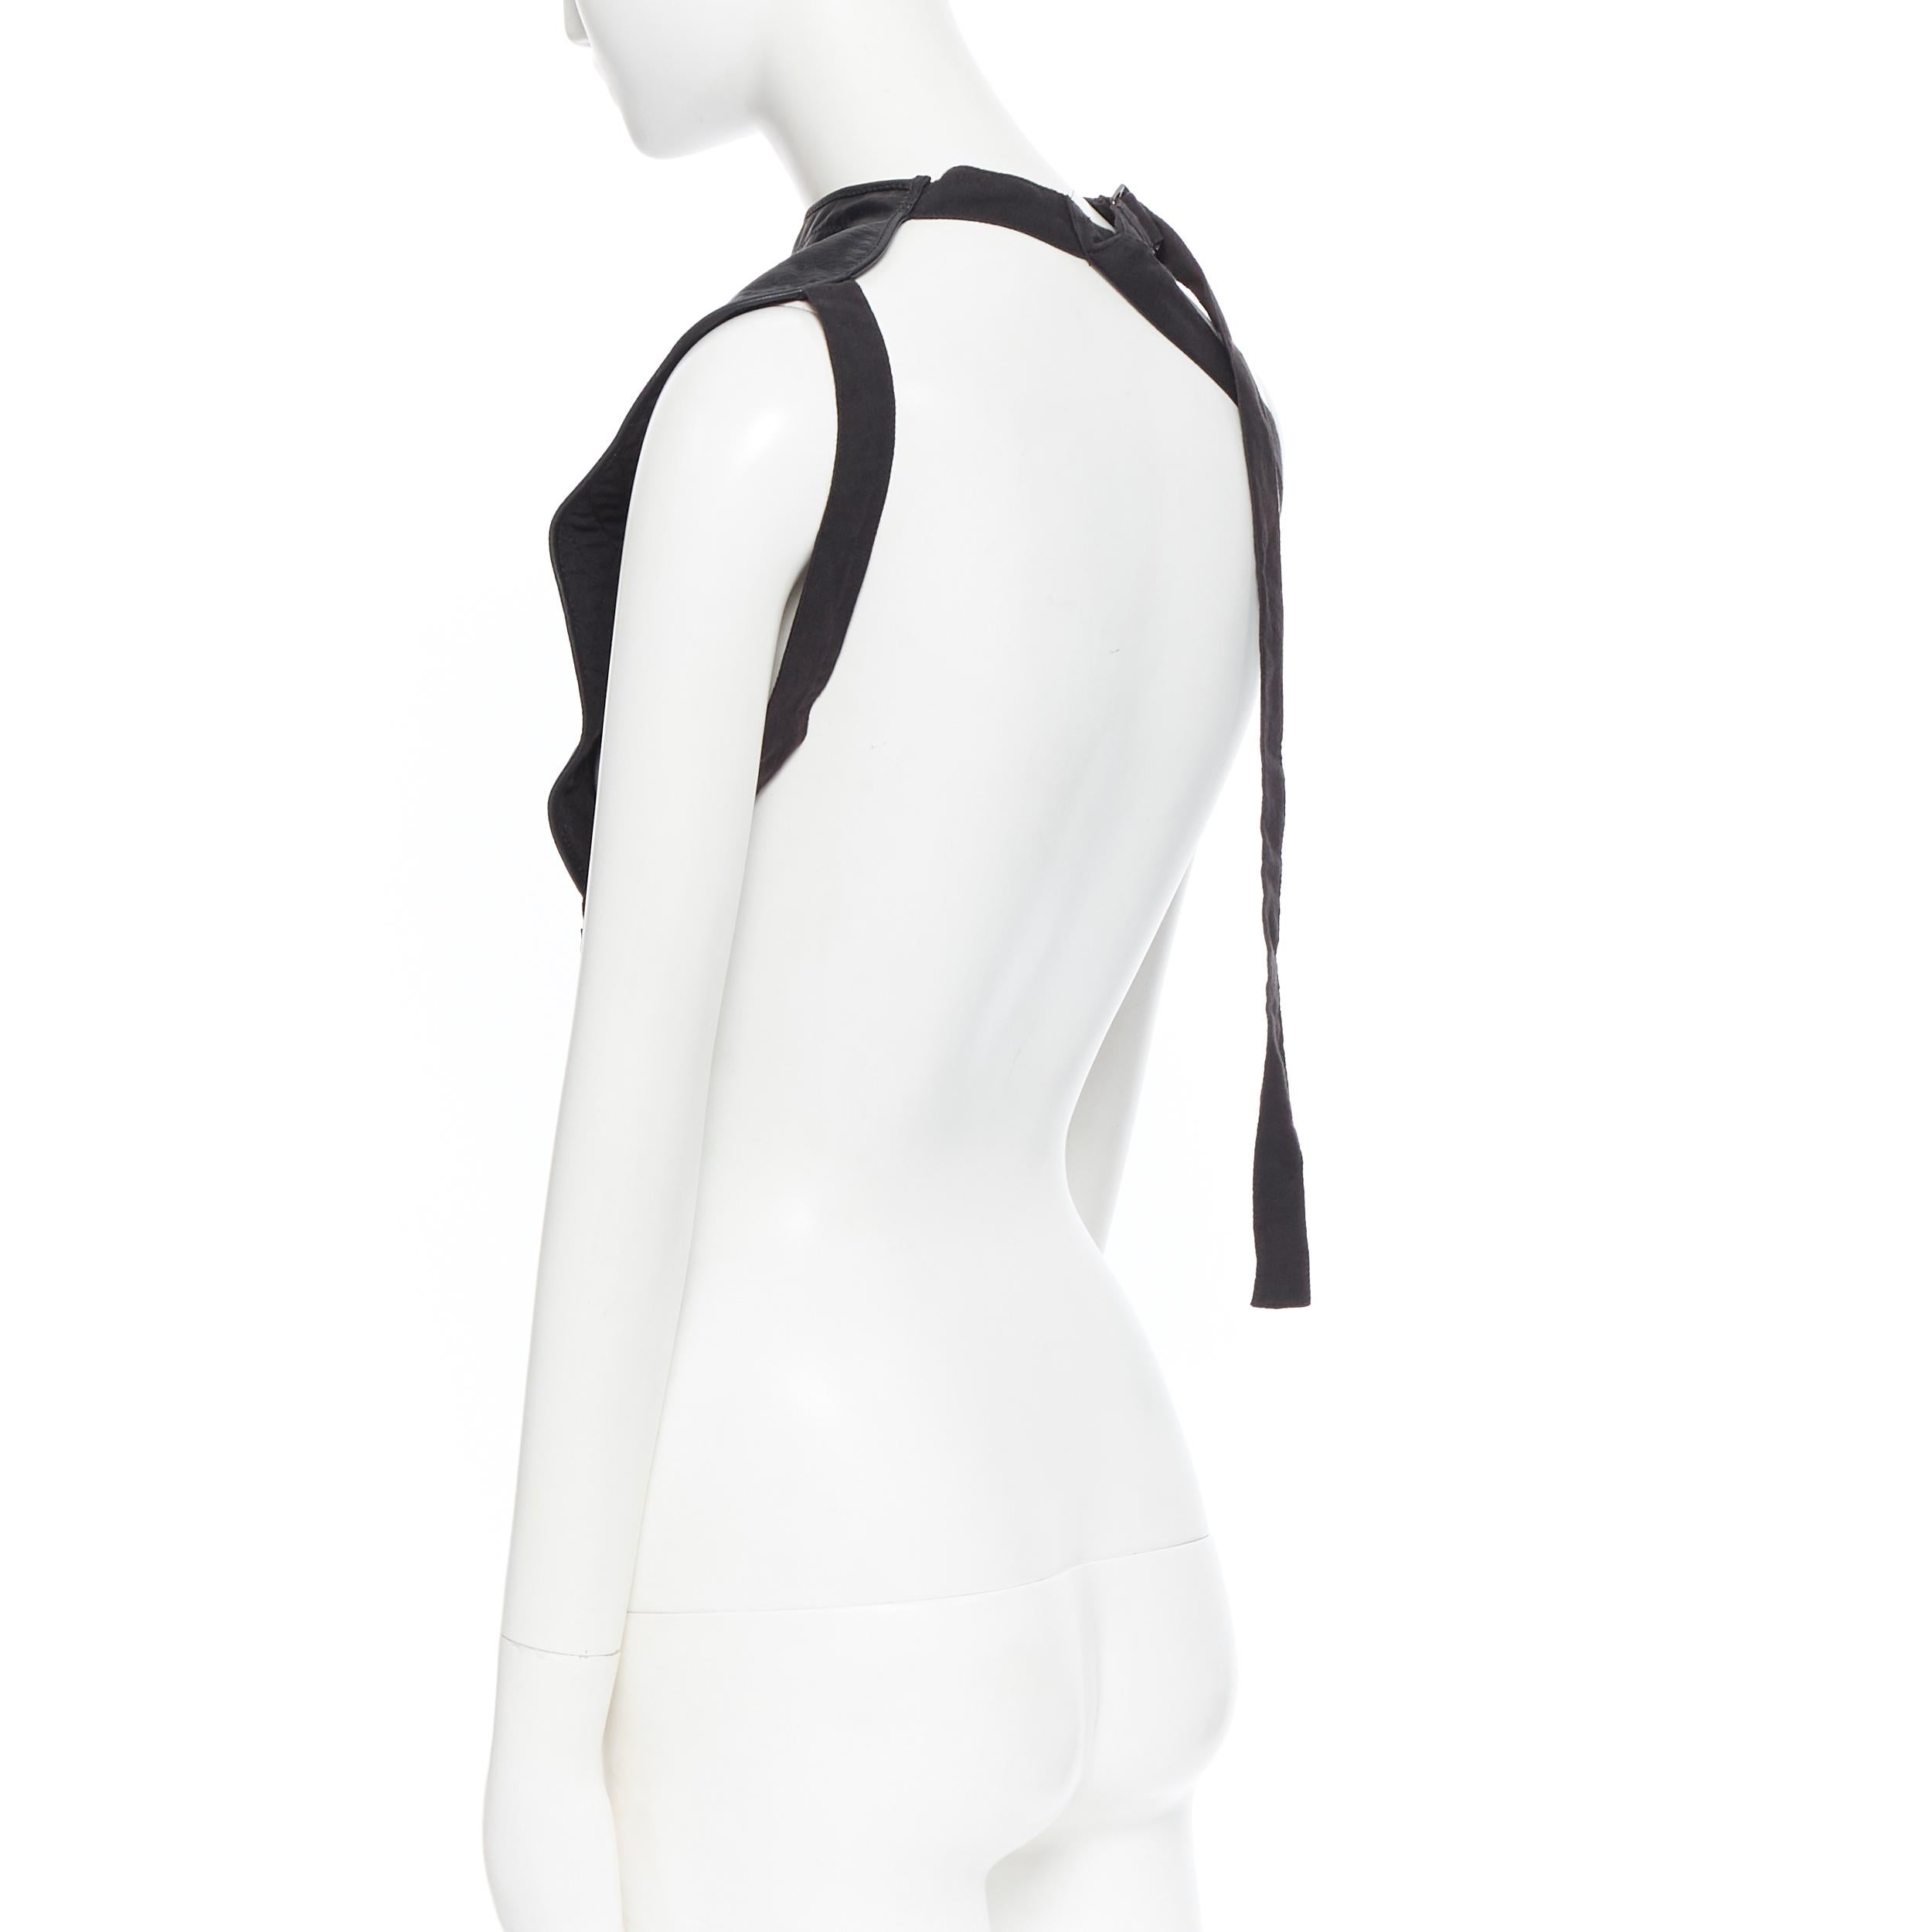 ANN DEMEULEMEESTER black contour stitched strapped harness leather piece top S 1